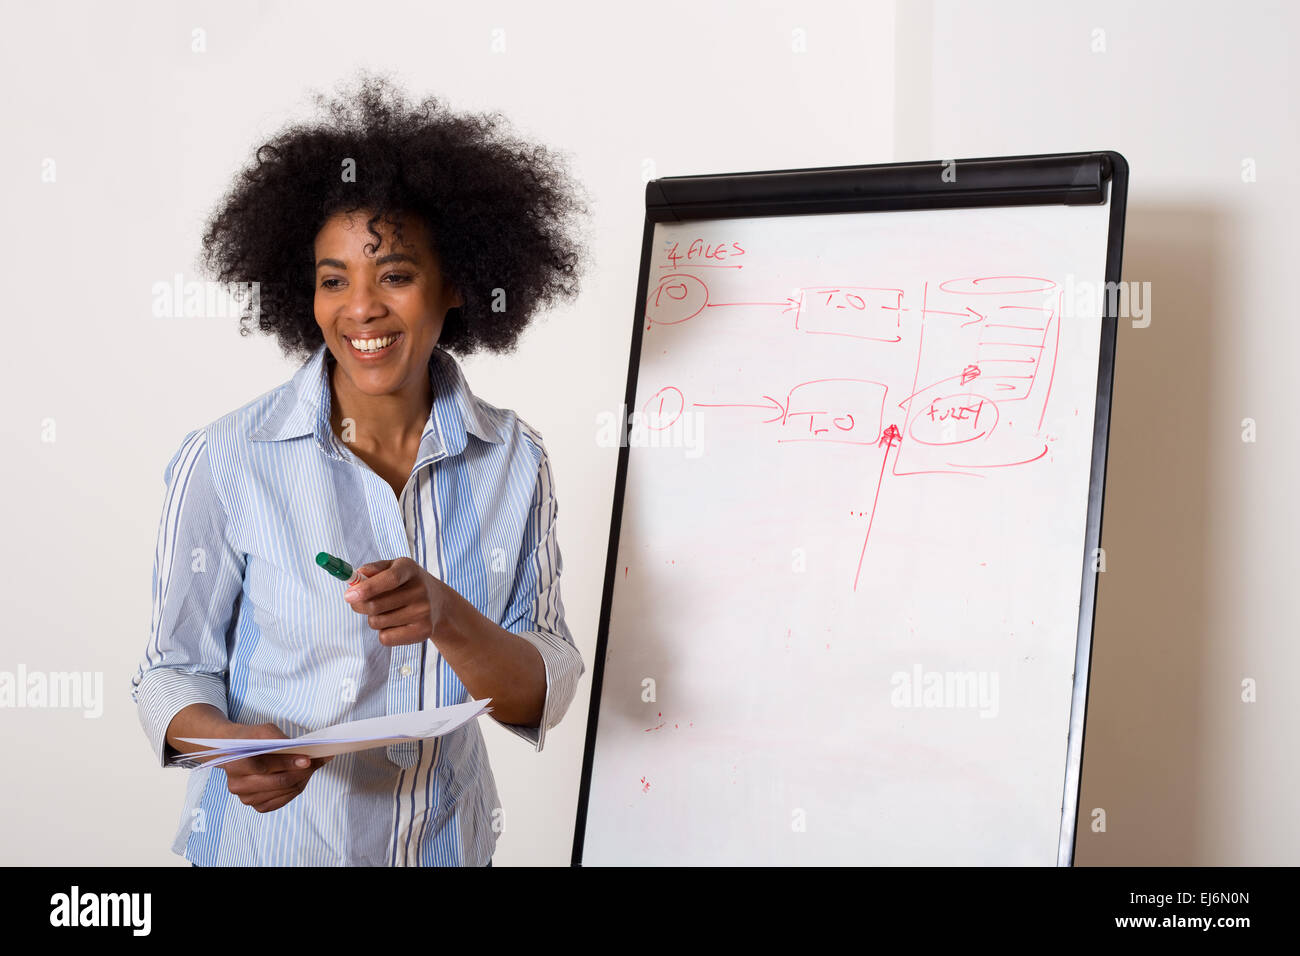 a young woman next to a whiteboard Stock Photo